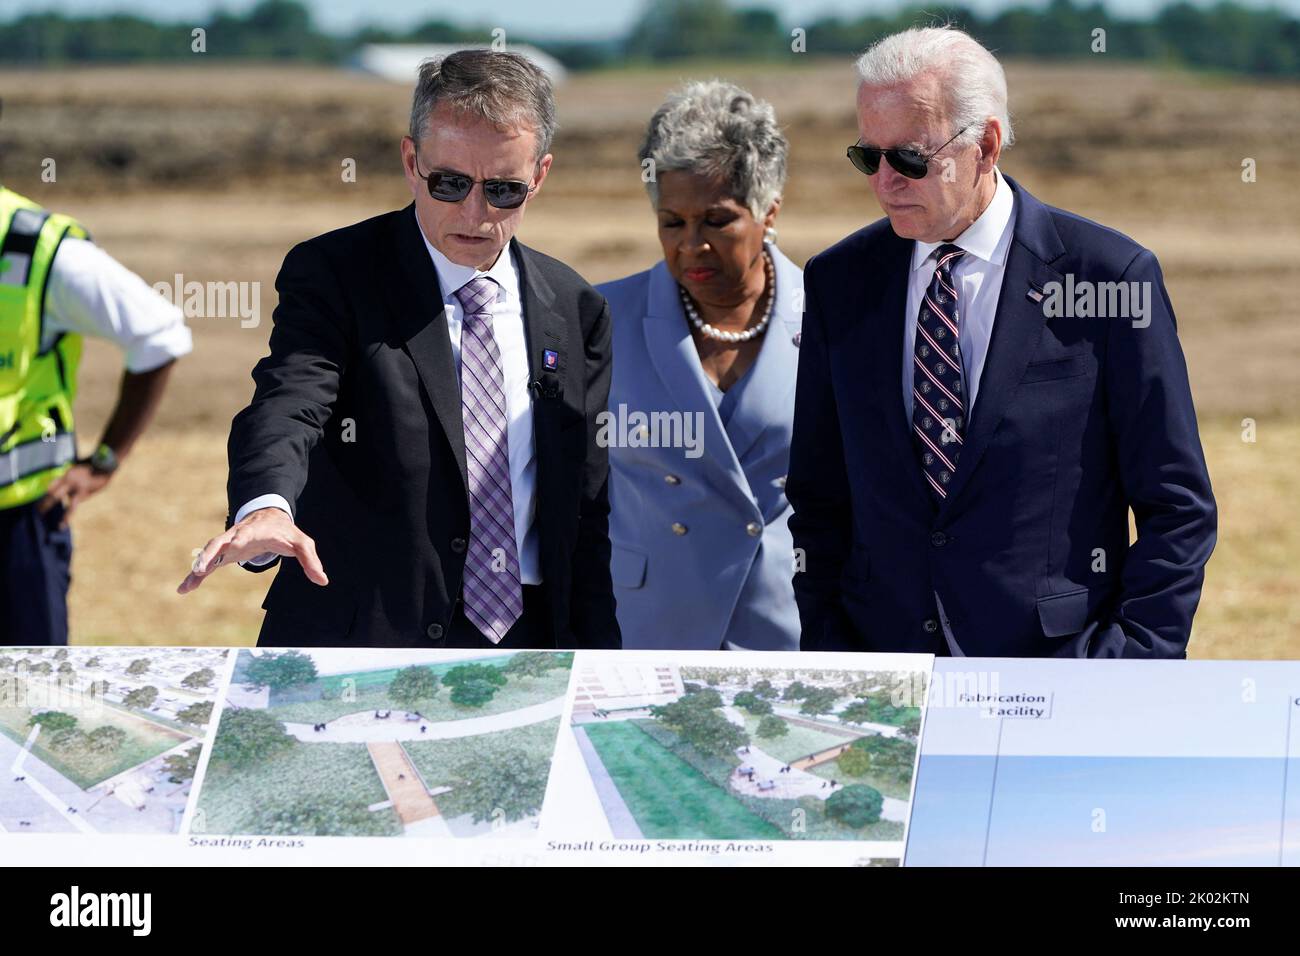 U.S. President Joe Biden listens to Intel CEO Pat Gelsinger as he attends the groundbreaking of the new Intel semiconductor manufacturing facility in New Albany, Ohio, U.S., September 9, 2022. REUTERS/Joshua Roberts Stock Photo